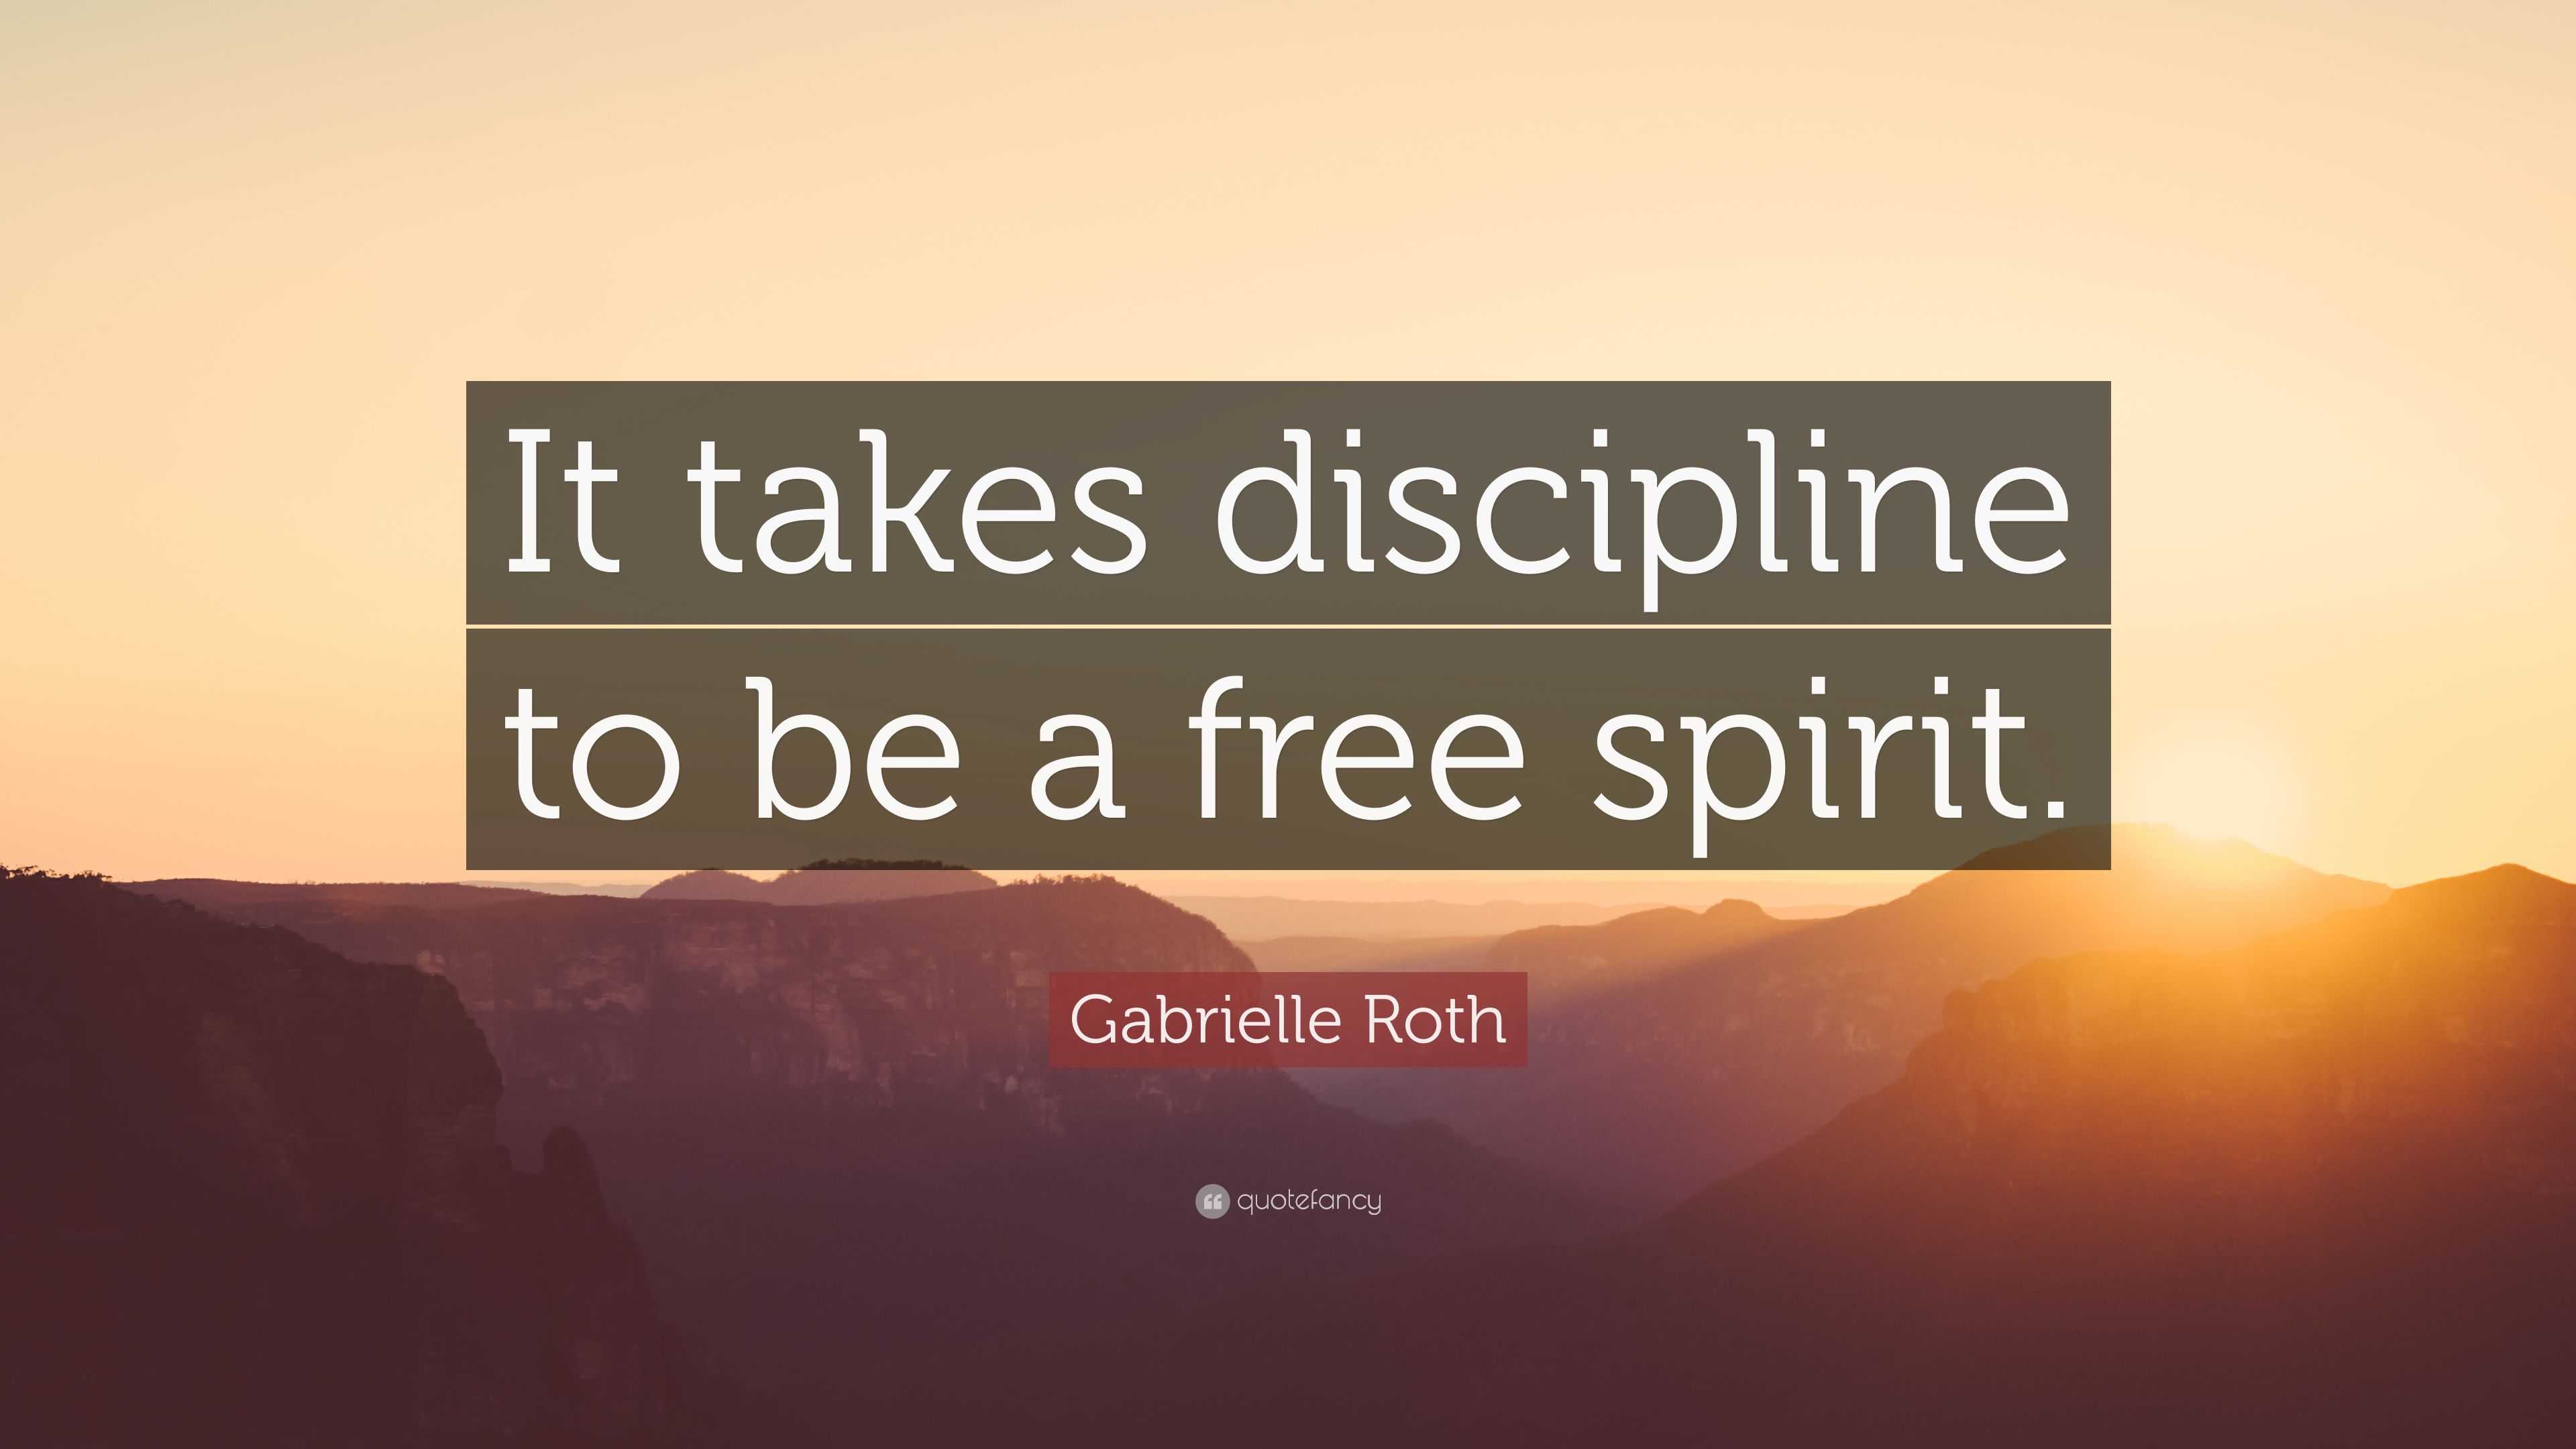 Gabrielle Roth Quote: “It takes discipline to be a free spirit.”